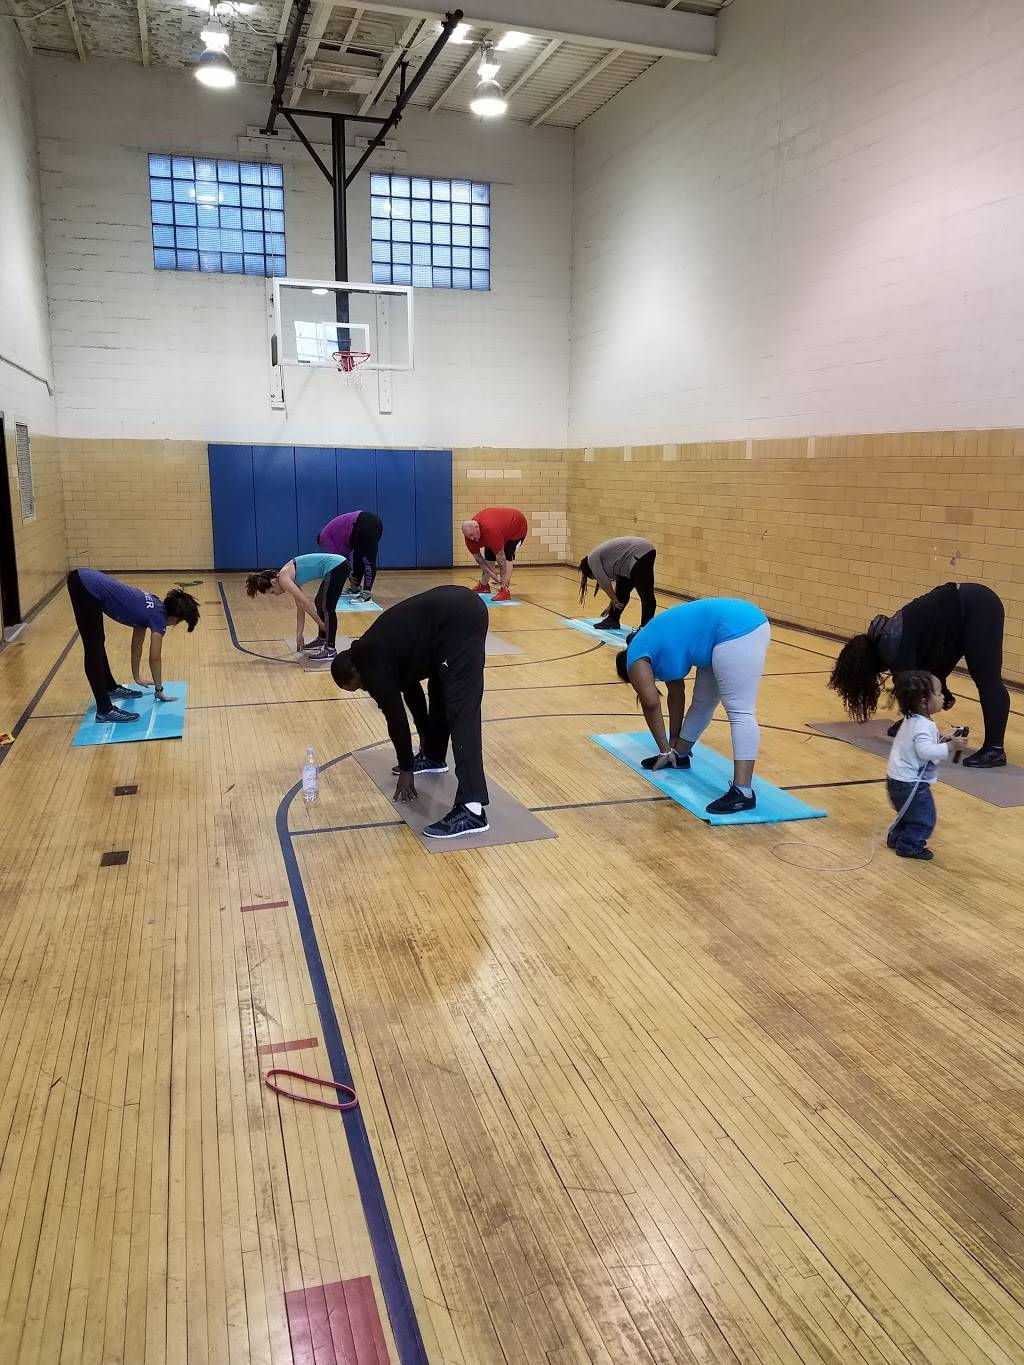 4VR FIT Group Fitness | 8904 Woodward Ave, Detroit, MI 48202 | Phone: (313) 770-7543